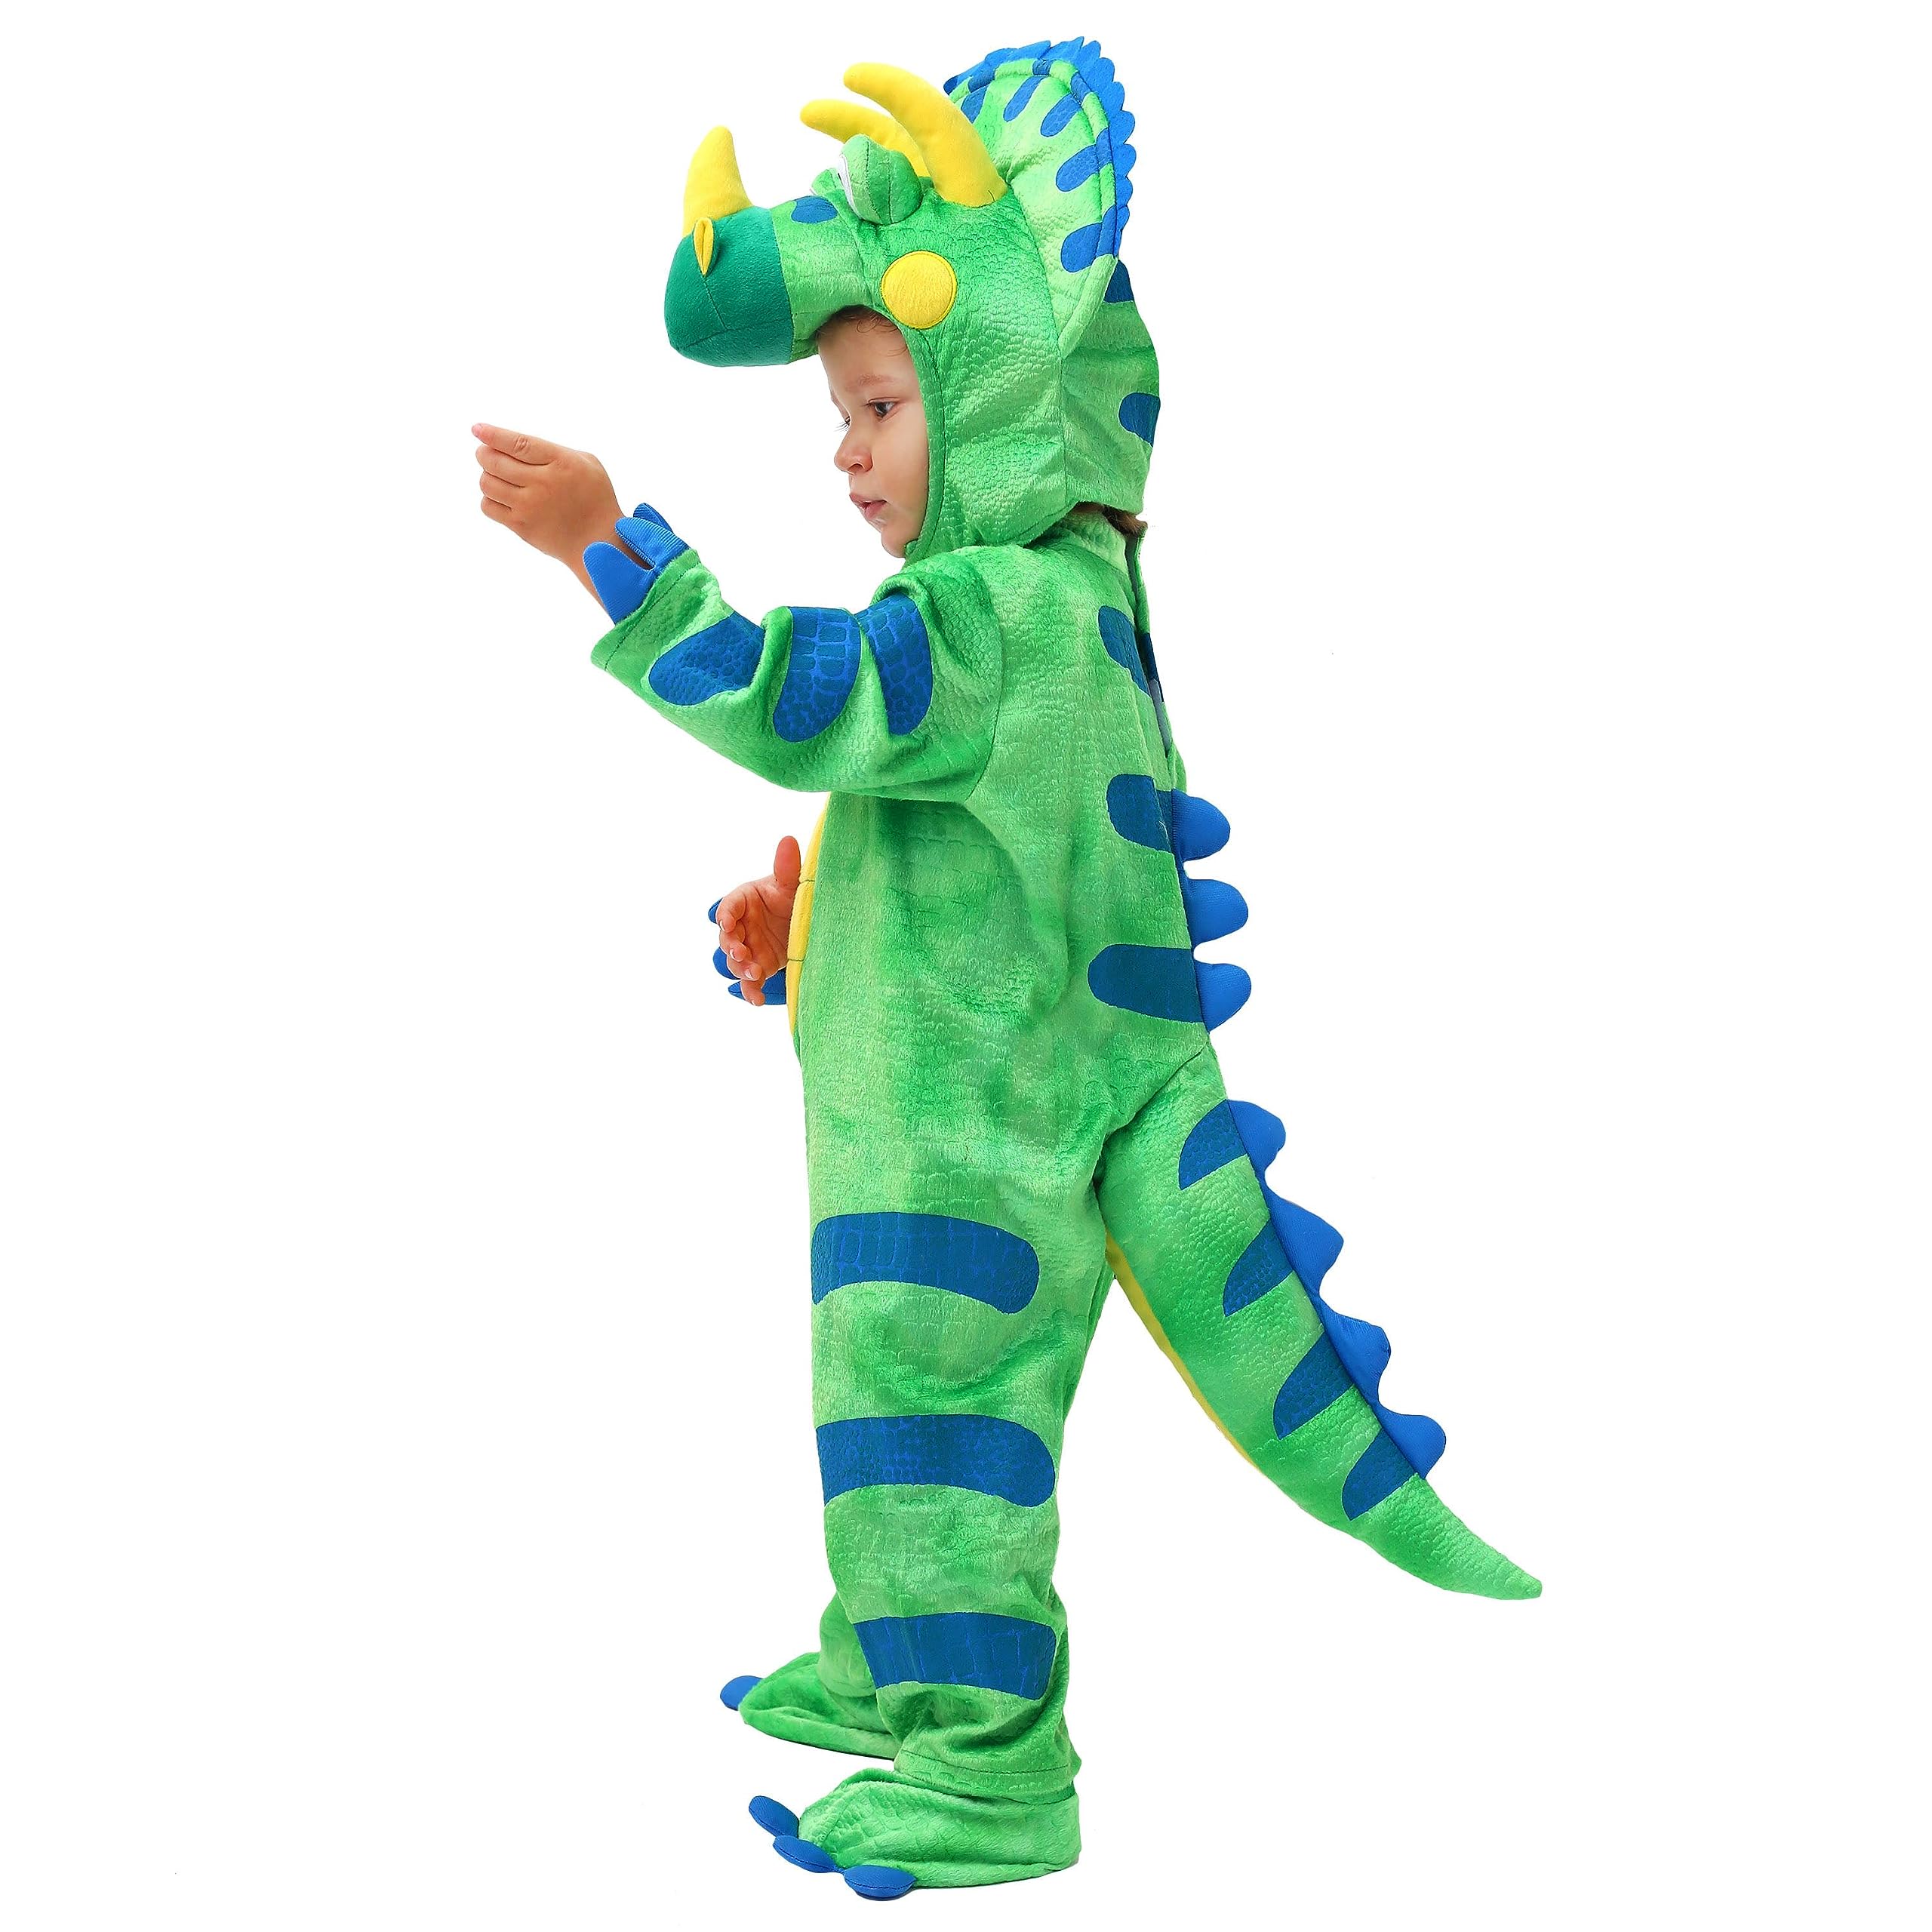 Spooktacular Creations Green Triceratops Dinosaur Costume with Toy Egg for Kid Halloween Dress Up Dino Themed Pretend Party (3T (3-4 yrs))